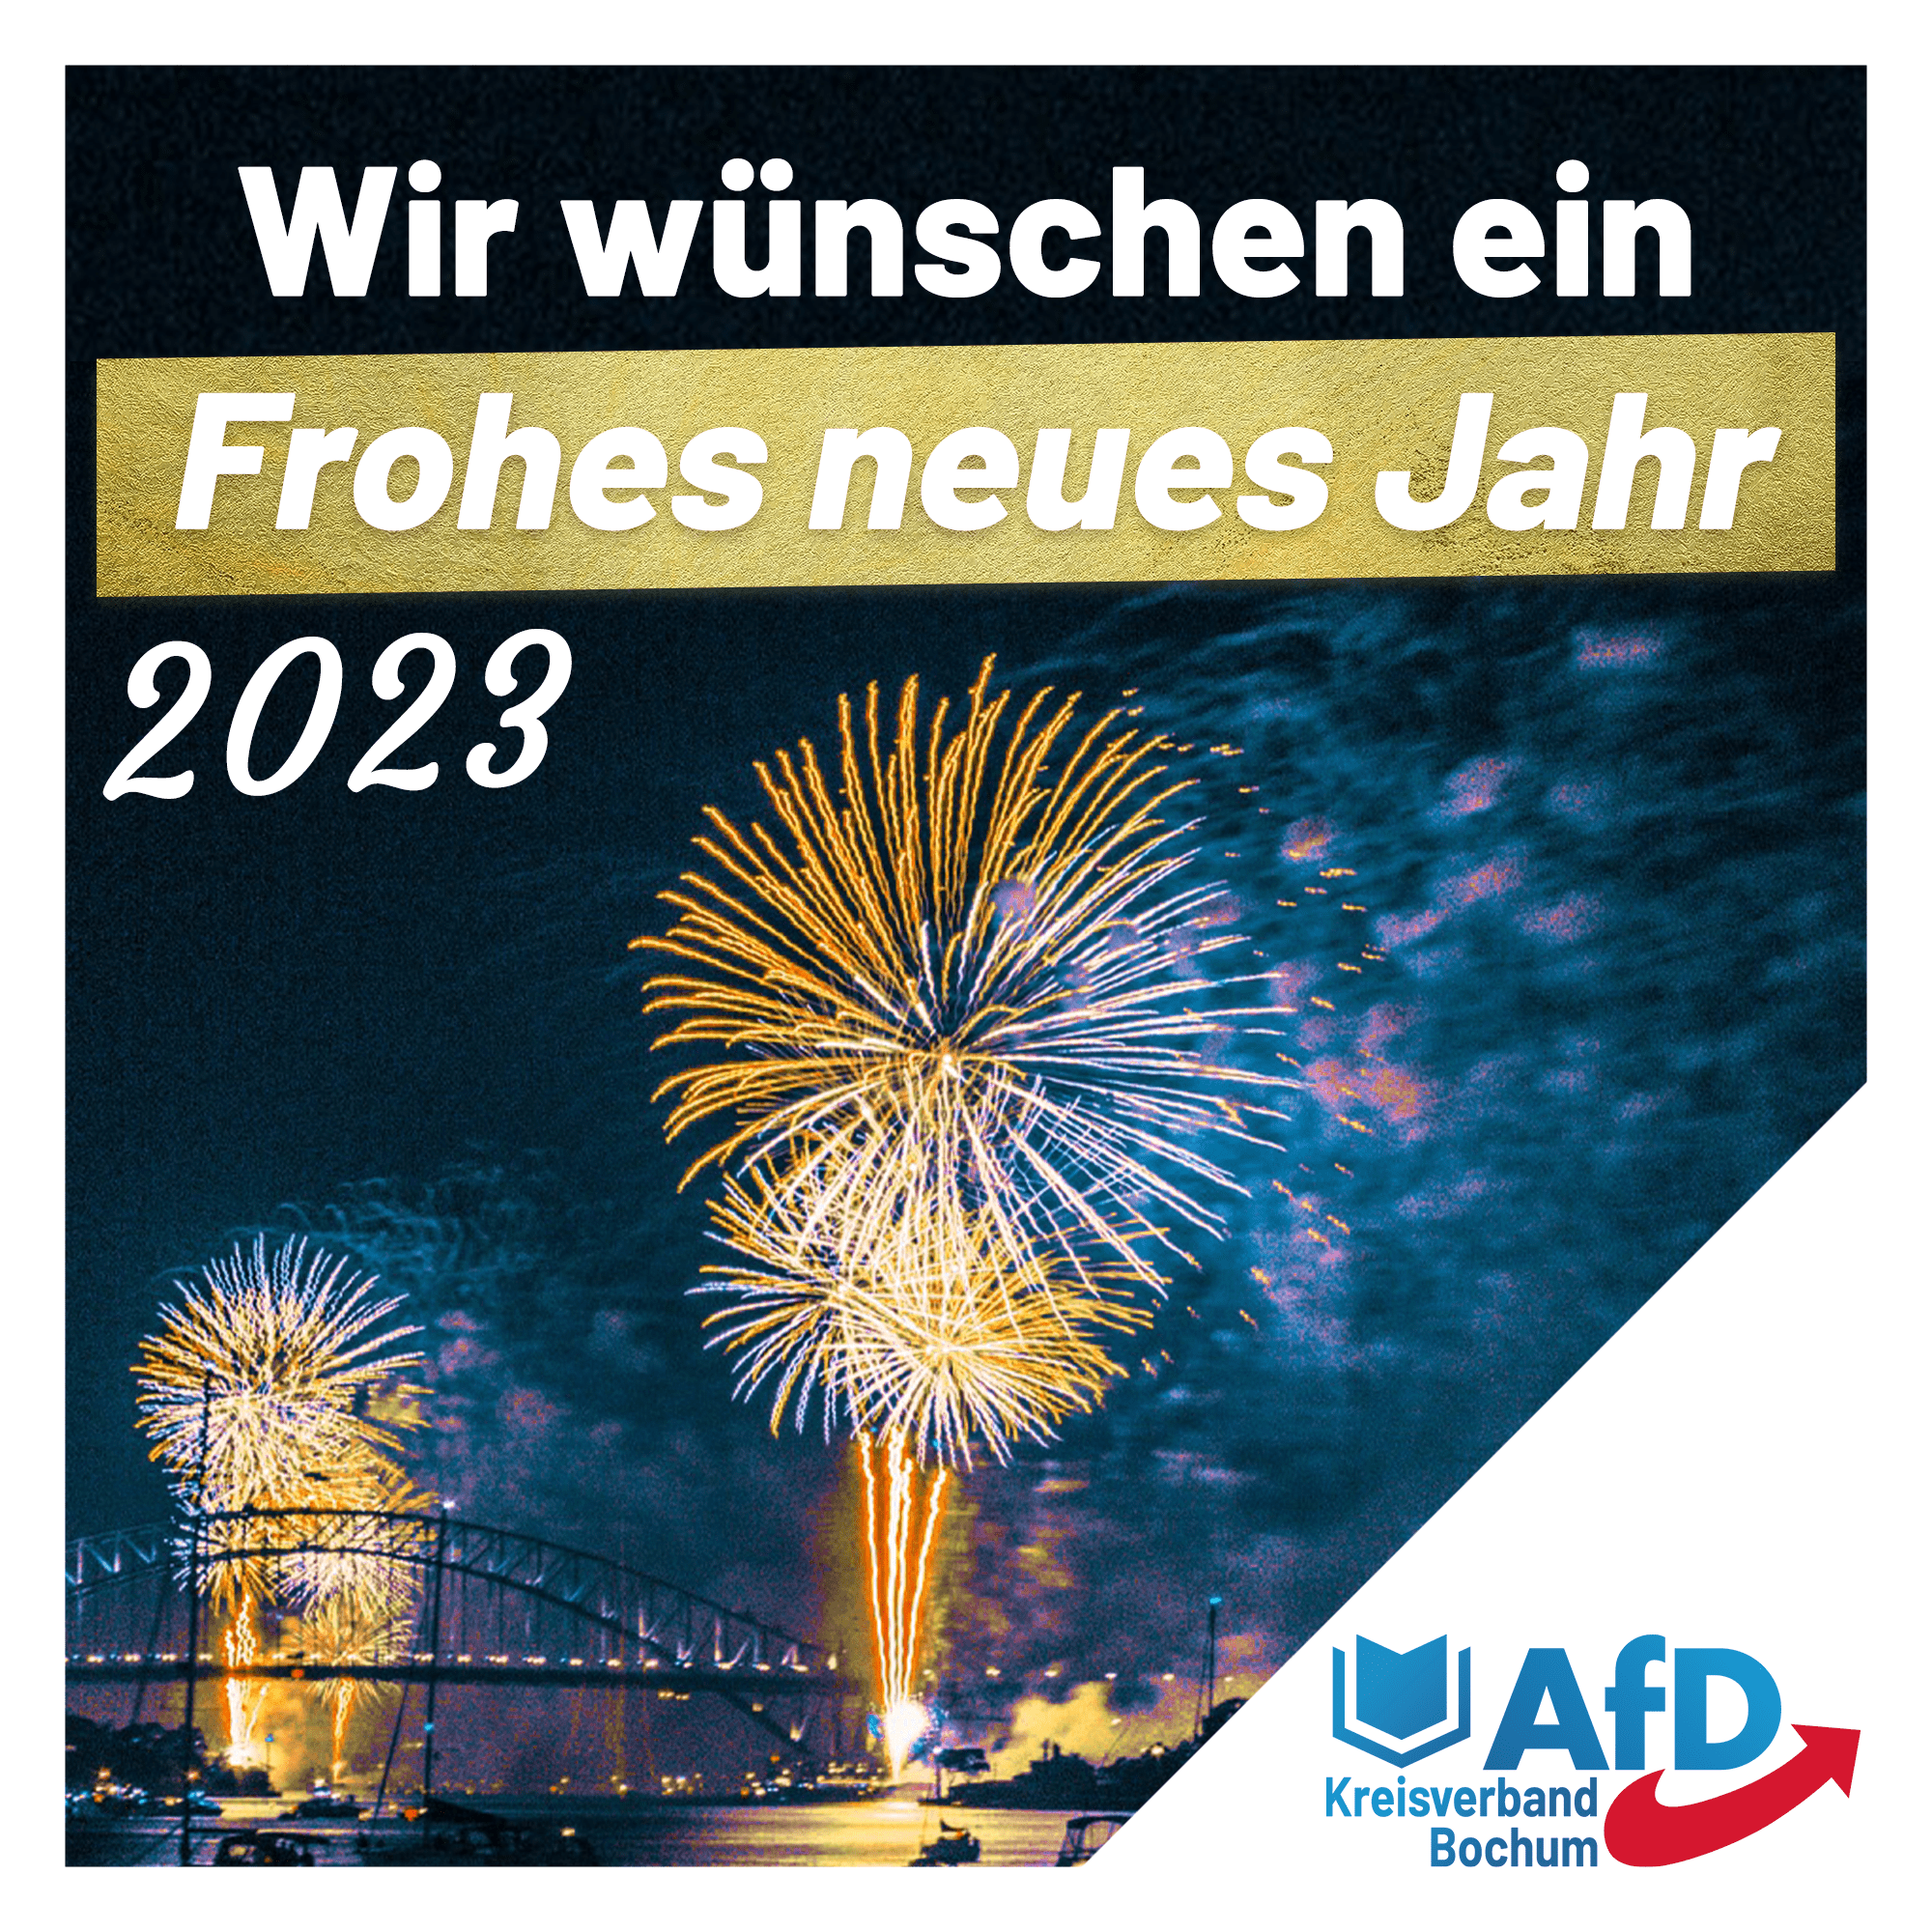 You are currently viewing Frohes neues Jahr 2023!